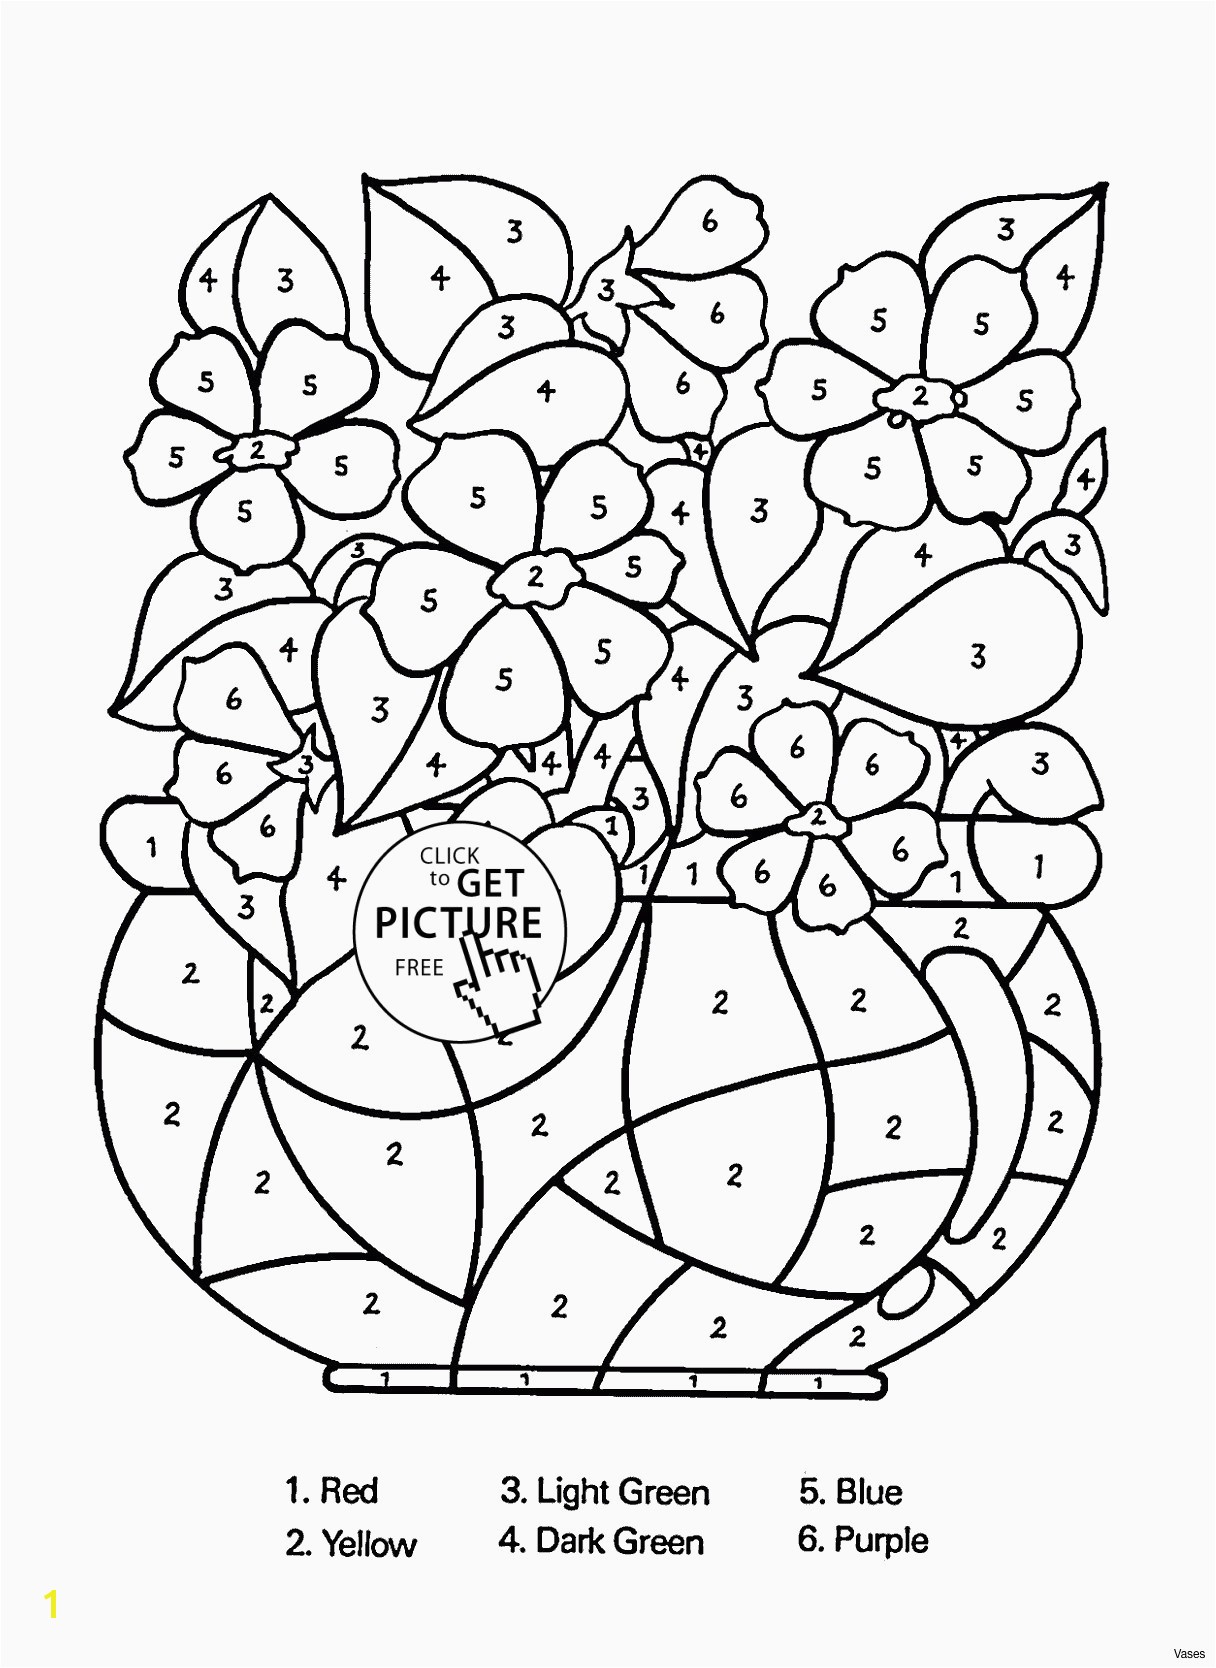 Coloring Pages Of Crocodiles Free Coloring Pages for Adults Crocodile Coloring Pages Coloring Pages